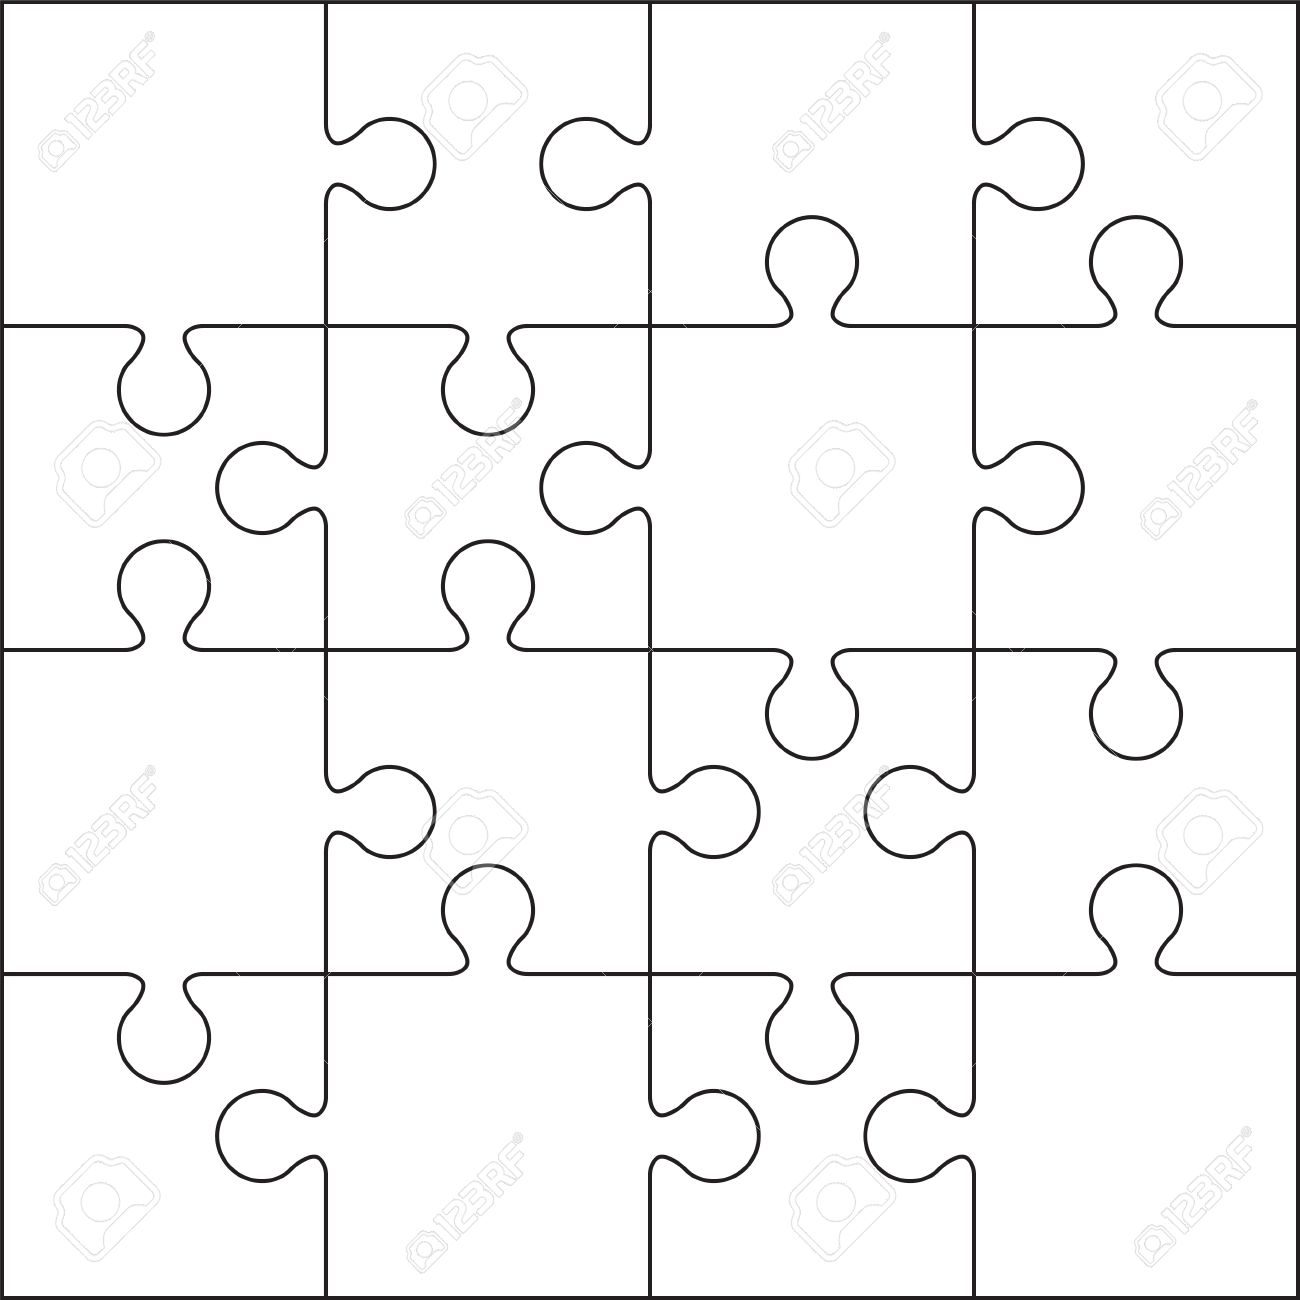 16 Jigsaw Puzzle Blank Template Or Cutting Guidelines Intended For Blank Jigsaw Piece Template